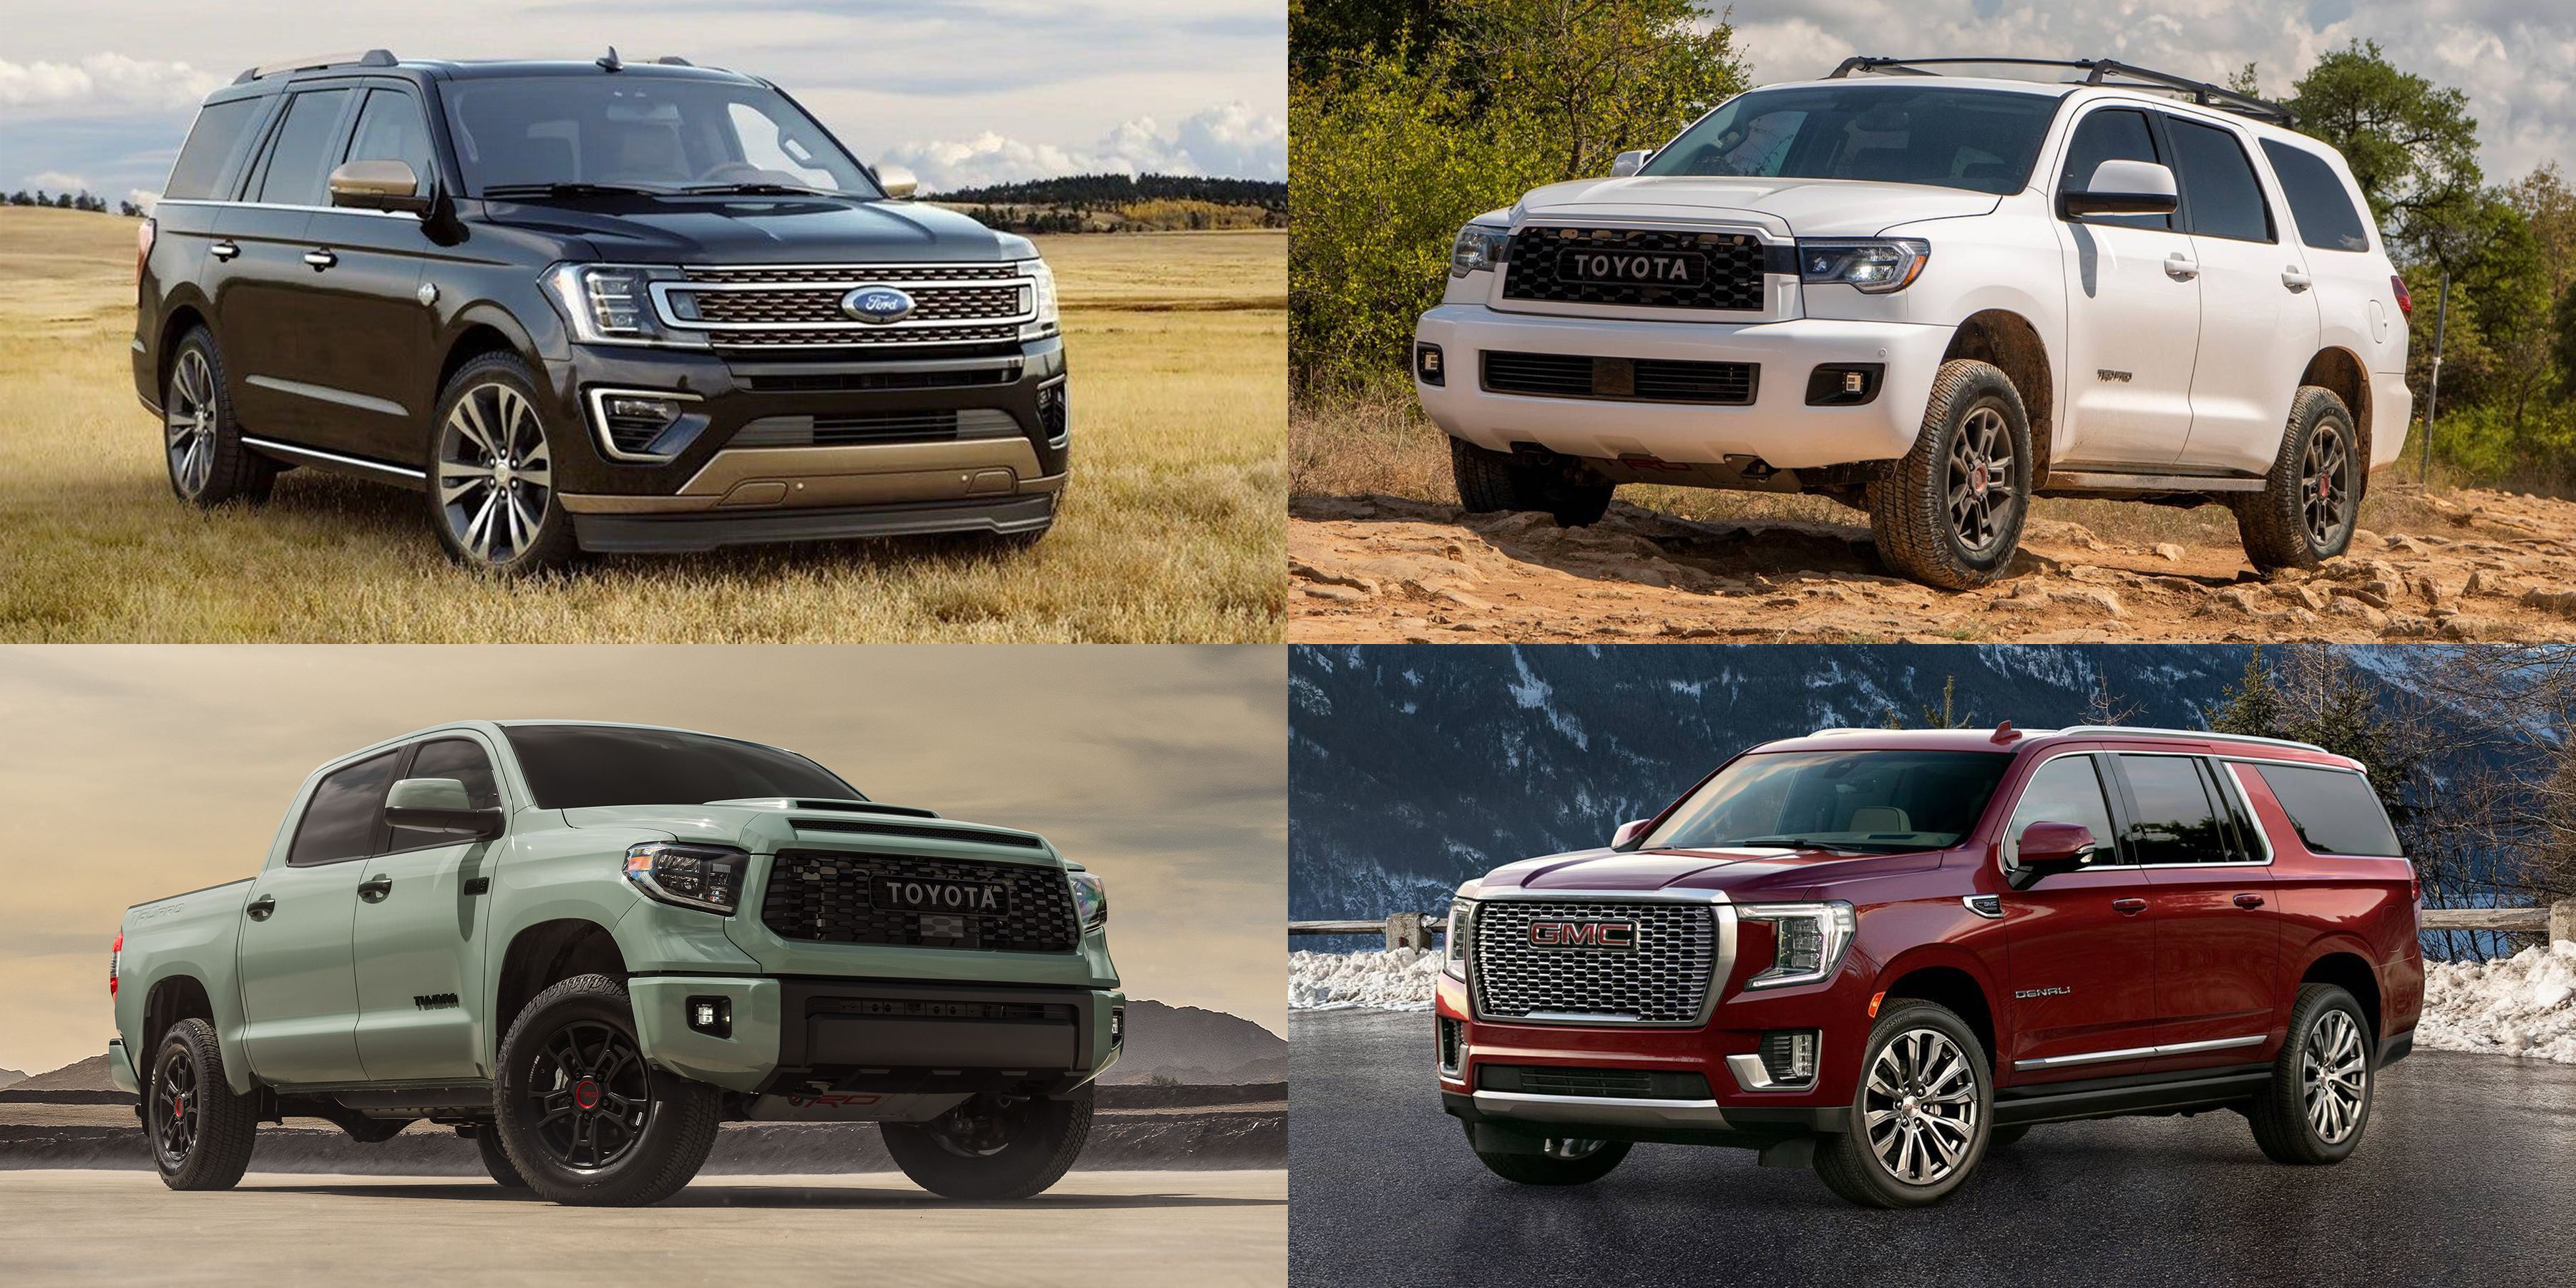 Top 16 Vehicles Most Likely to Reach 200,000 Miles